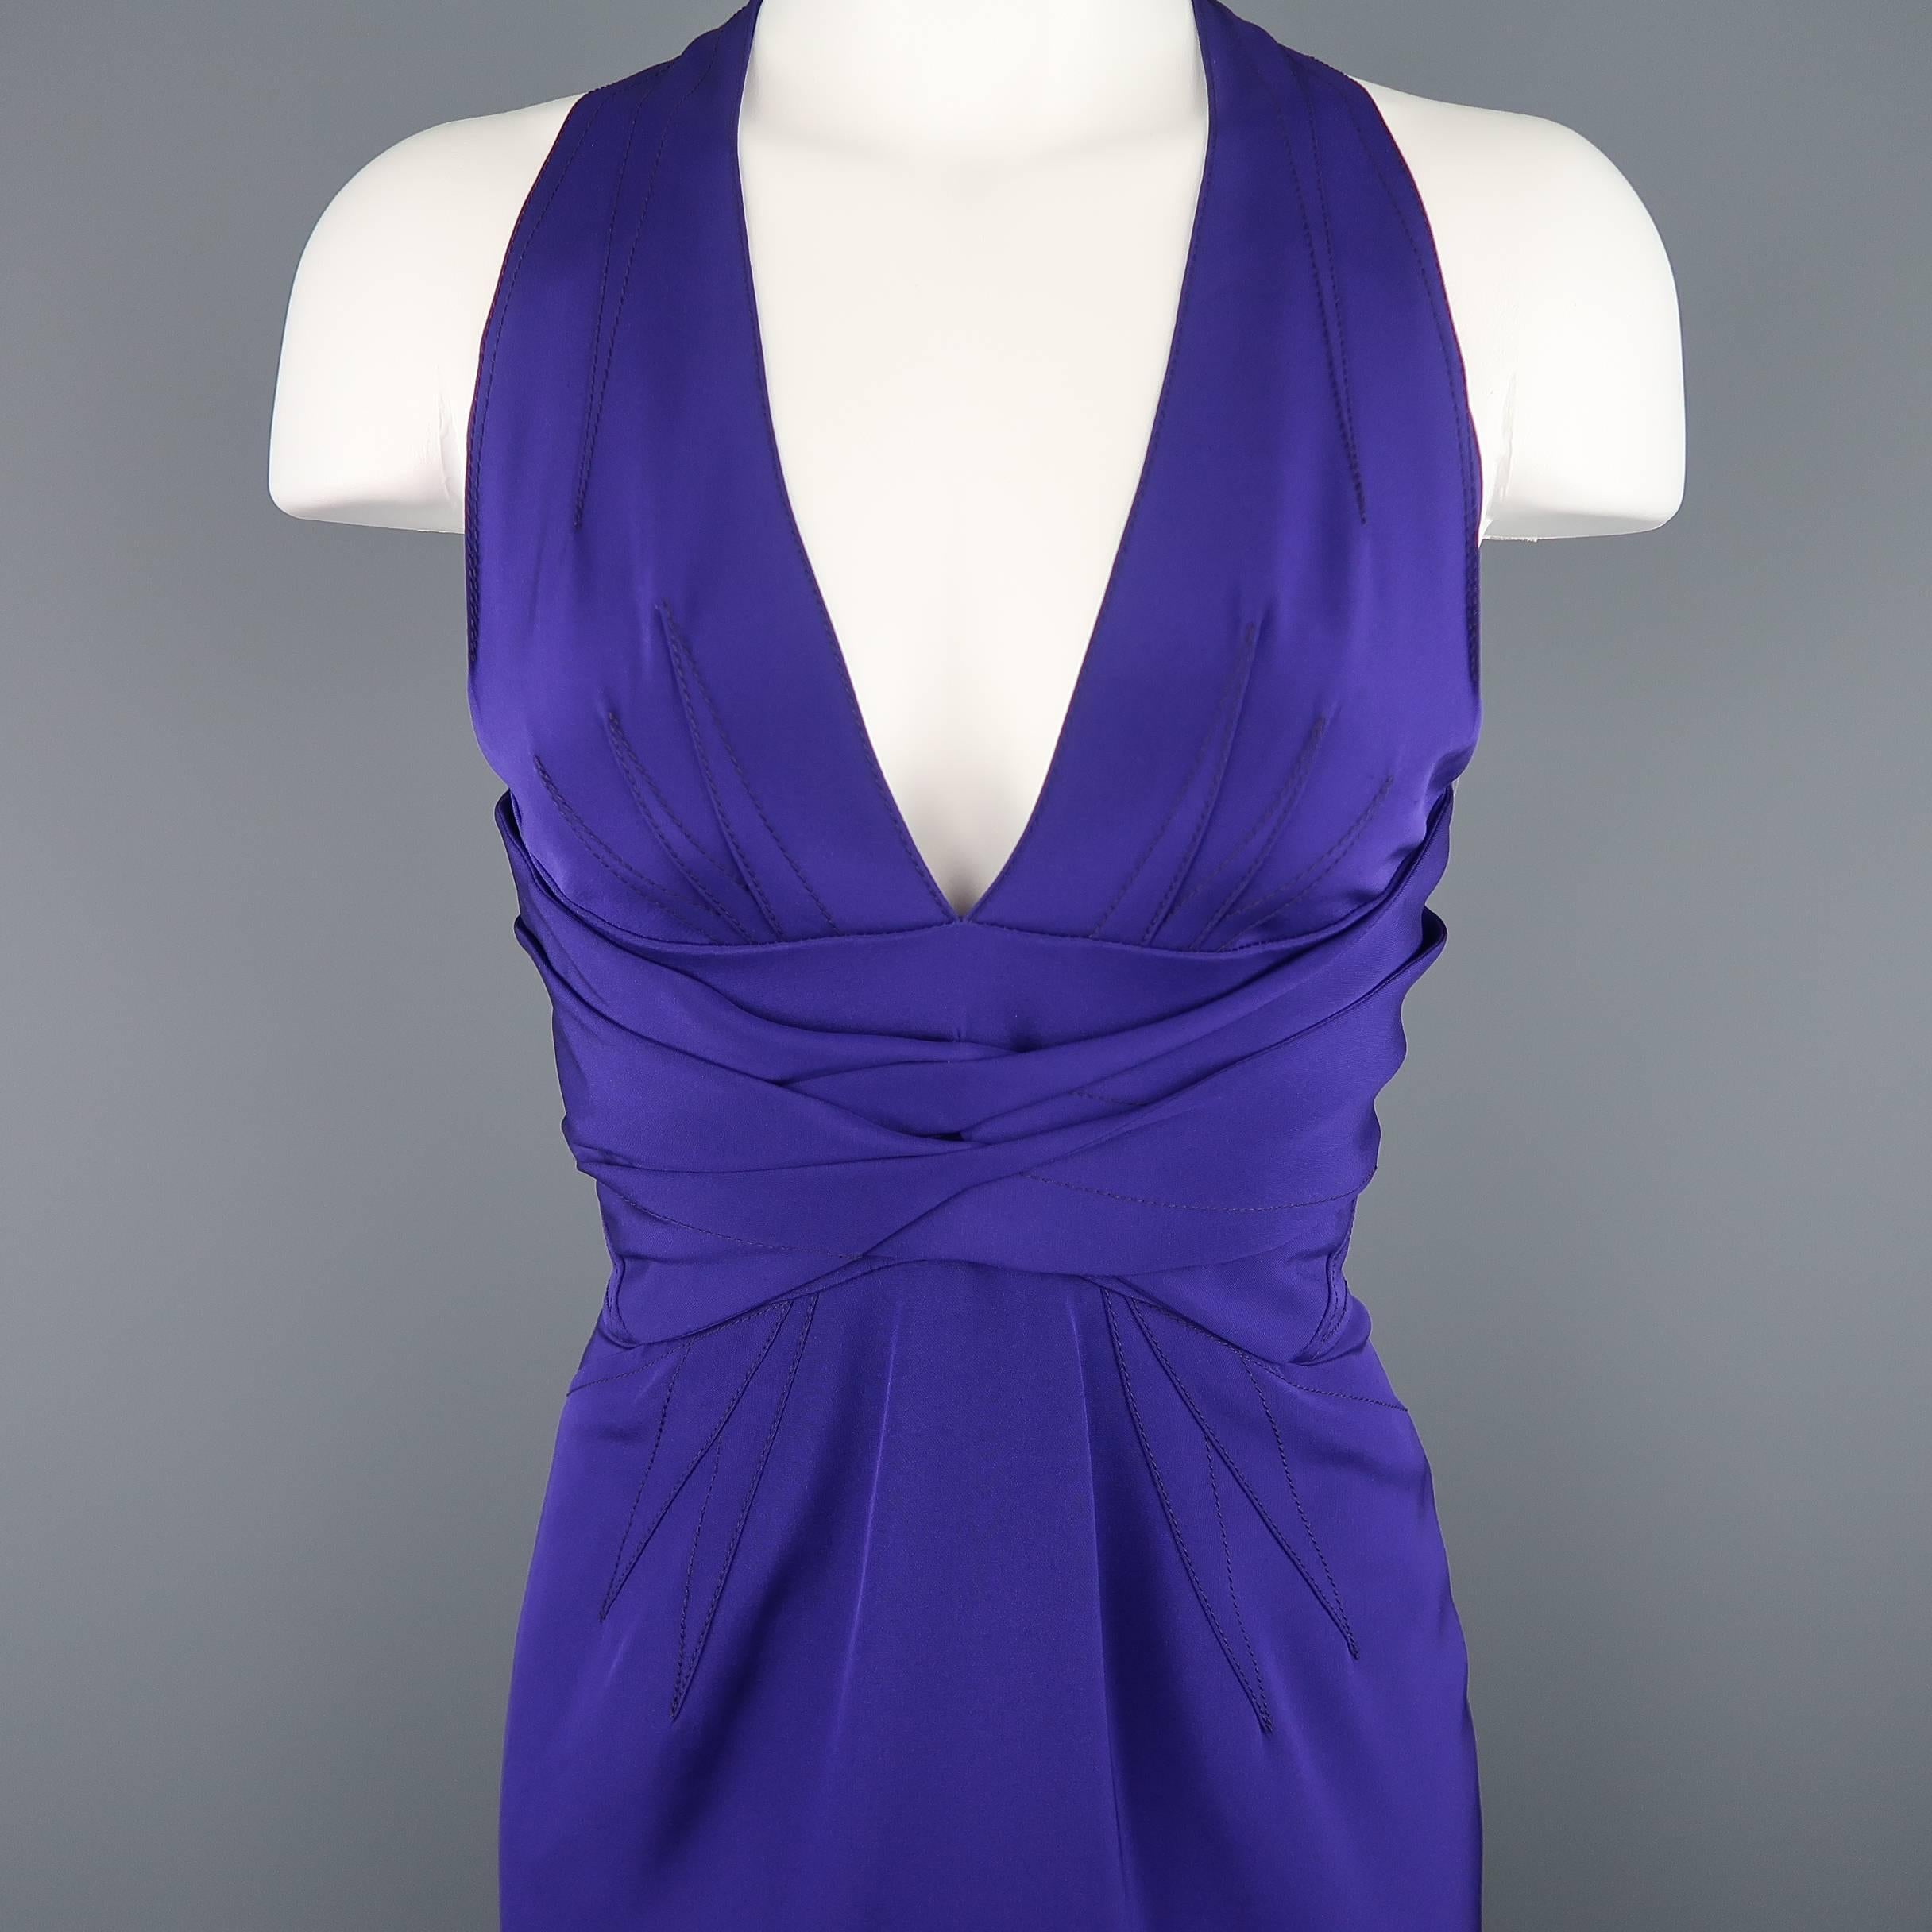 ZAC POSEN cocktail dress comes in a purple stretch silk with a deep V neck halter top, gathered sash underbust, fitted skirt, and dart details throughout.
 
Excellent Pre-Owned Condition.
Marked: 2
 
Measurements:
 
Shoulder: 9.5 in.
Bust: 34